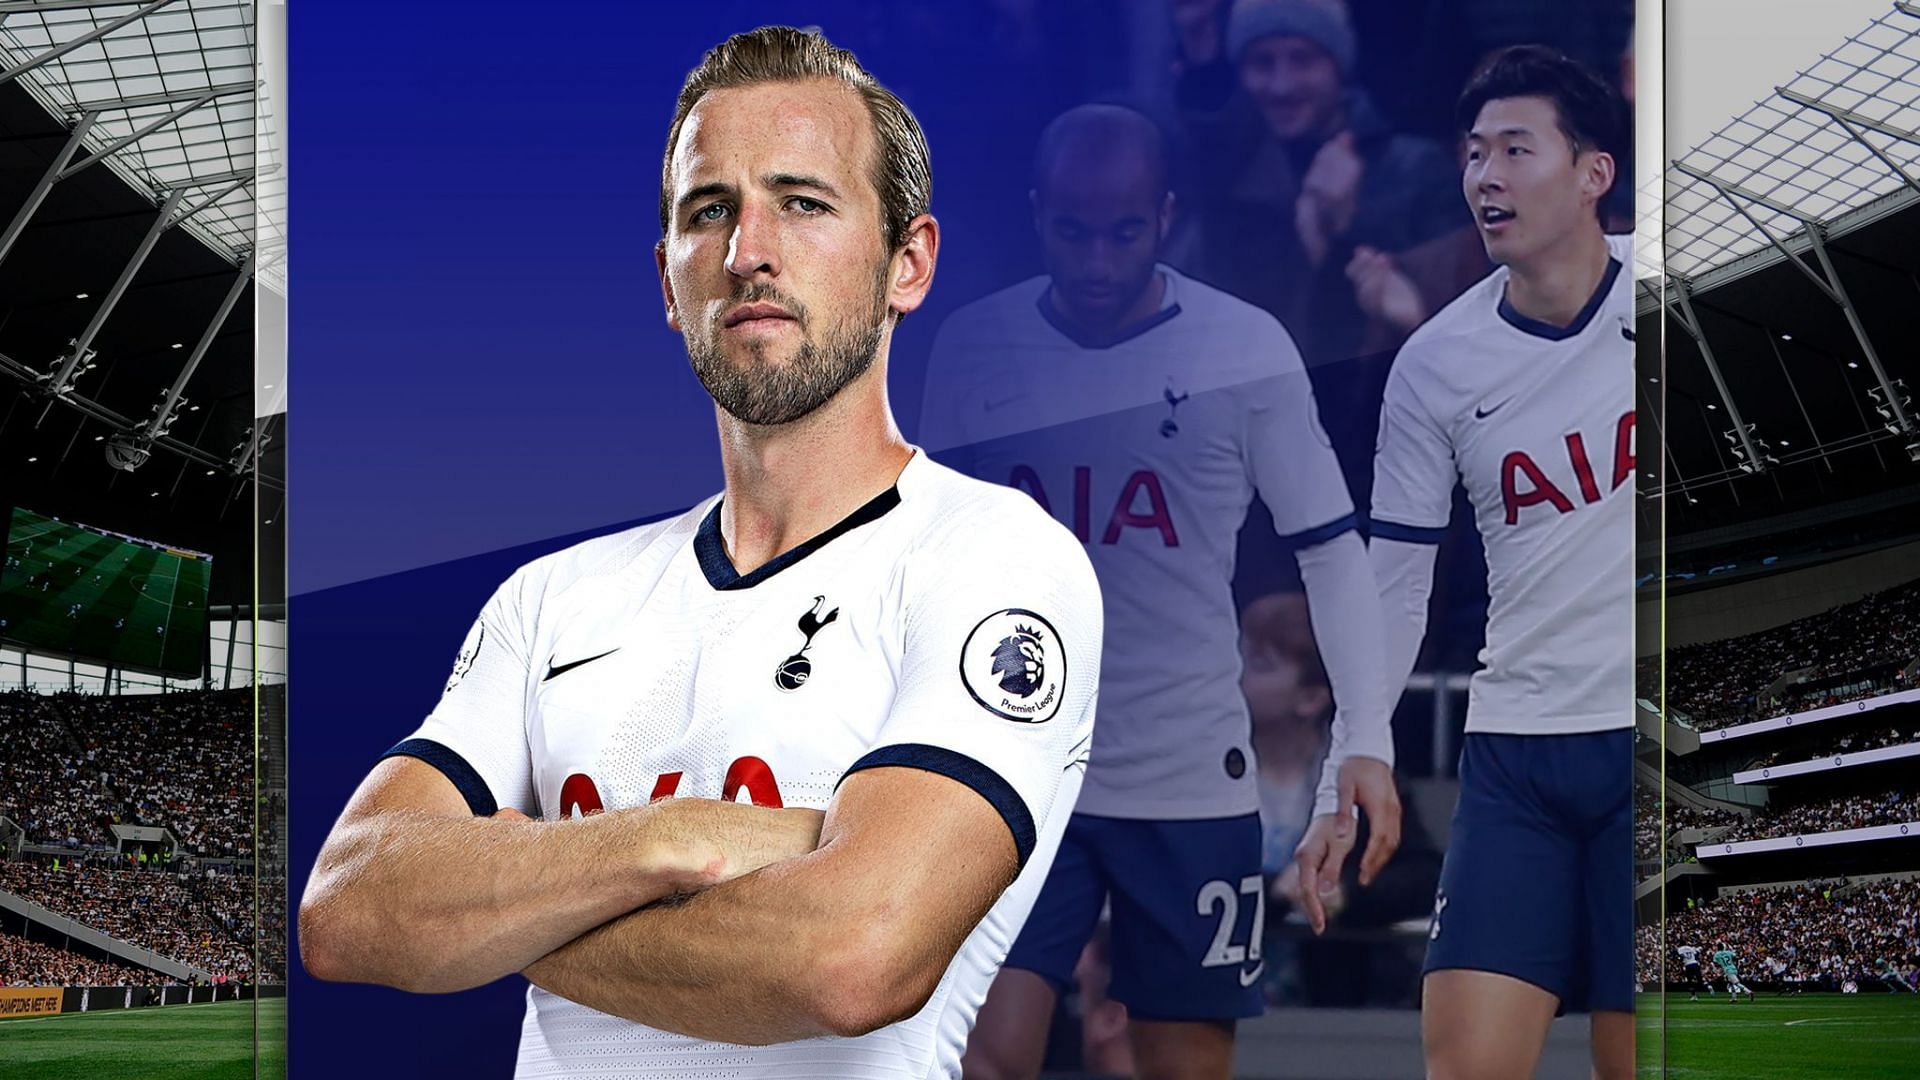 Harry Kane is one of the best strikers in the world at the moment.